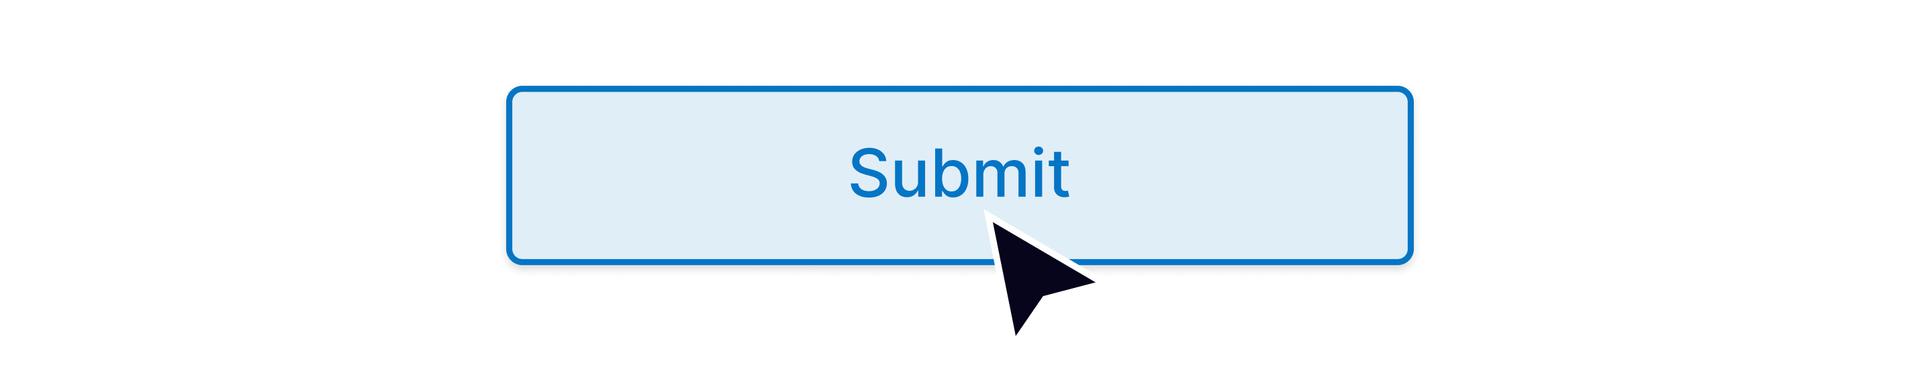 Image of Submit button